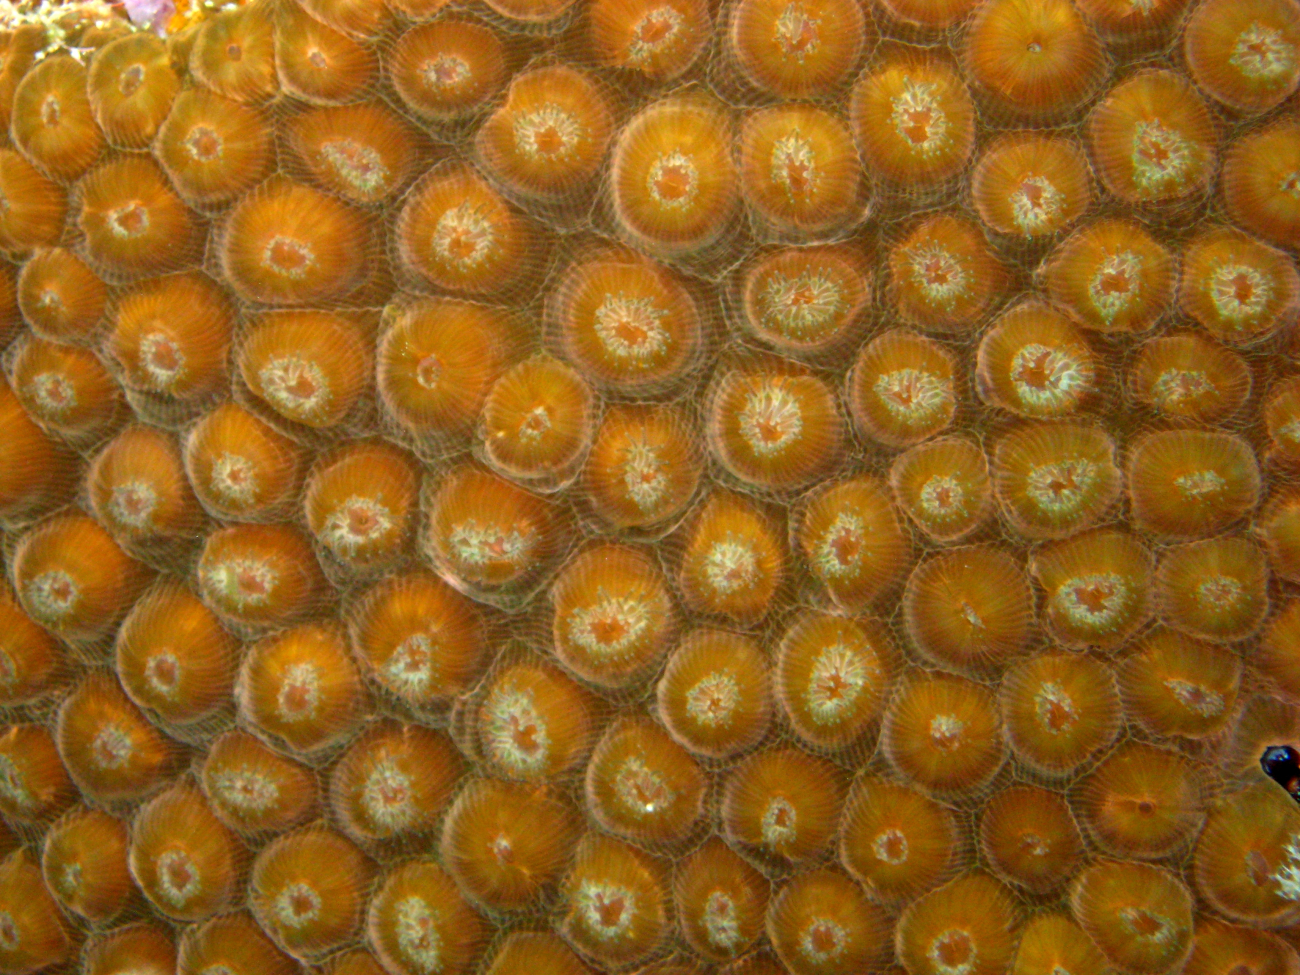 Scleractinian star coral